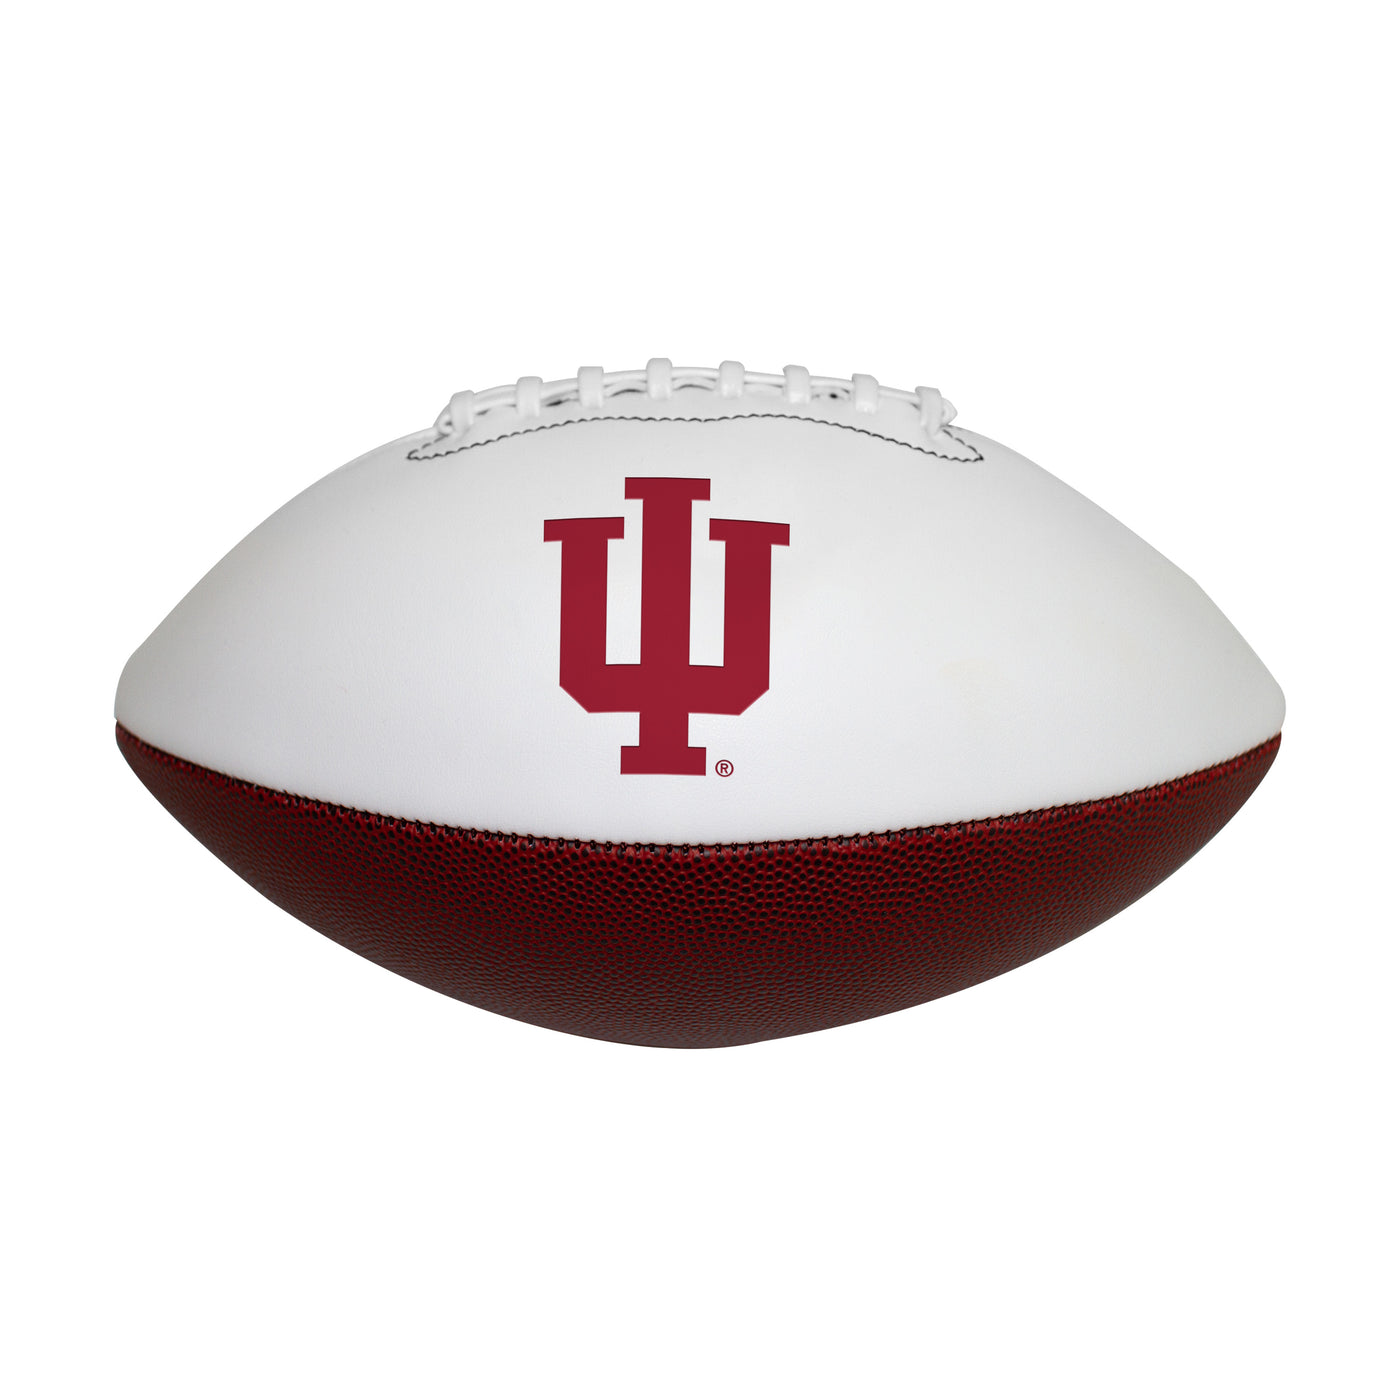 Indiana Official-Size Autograph Football